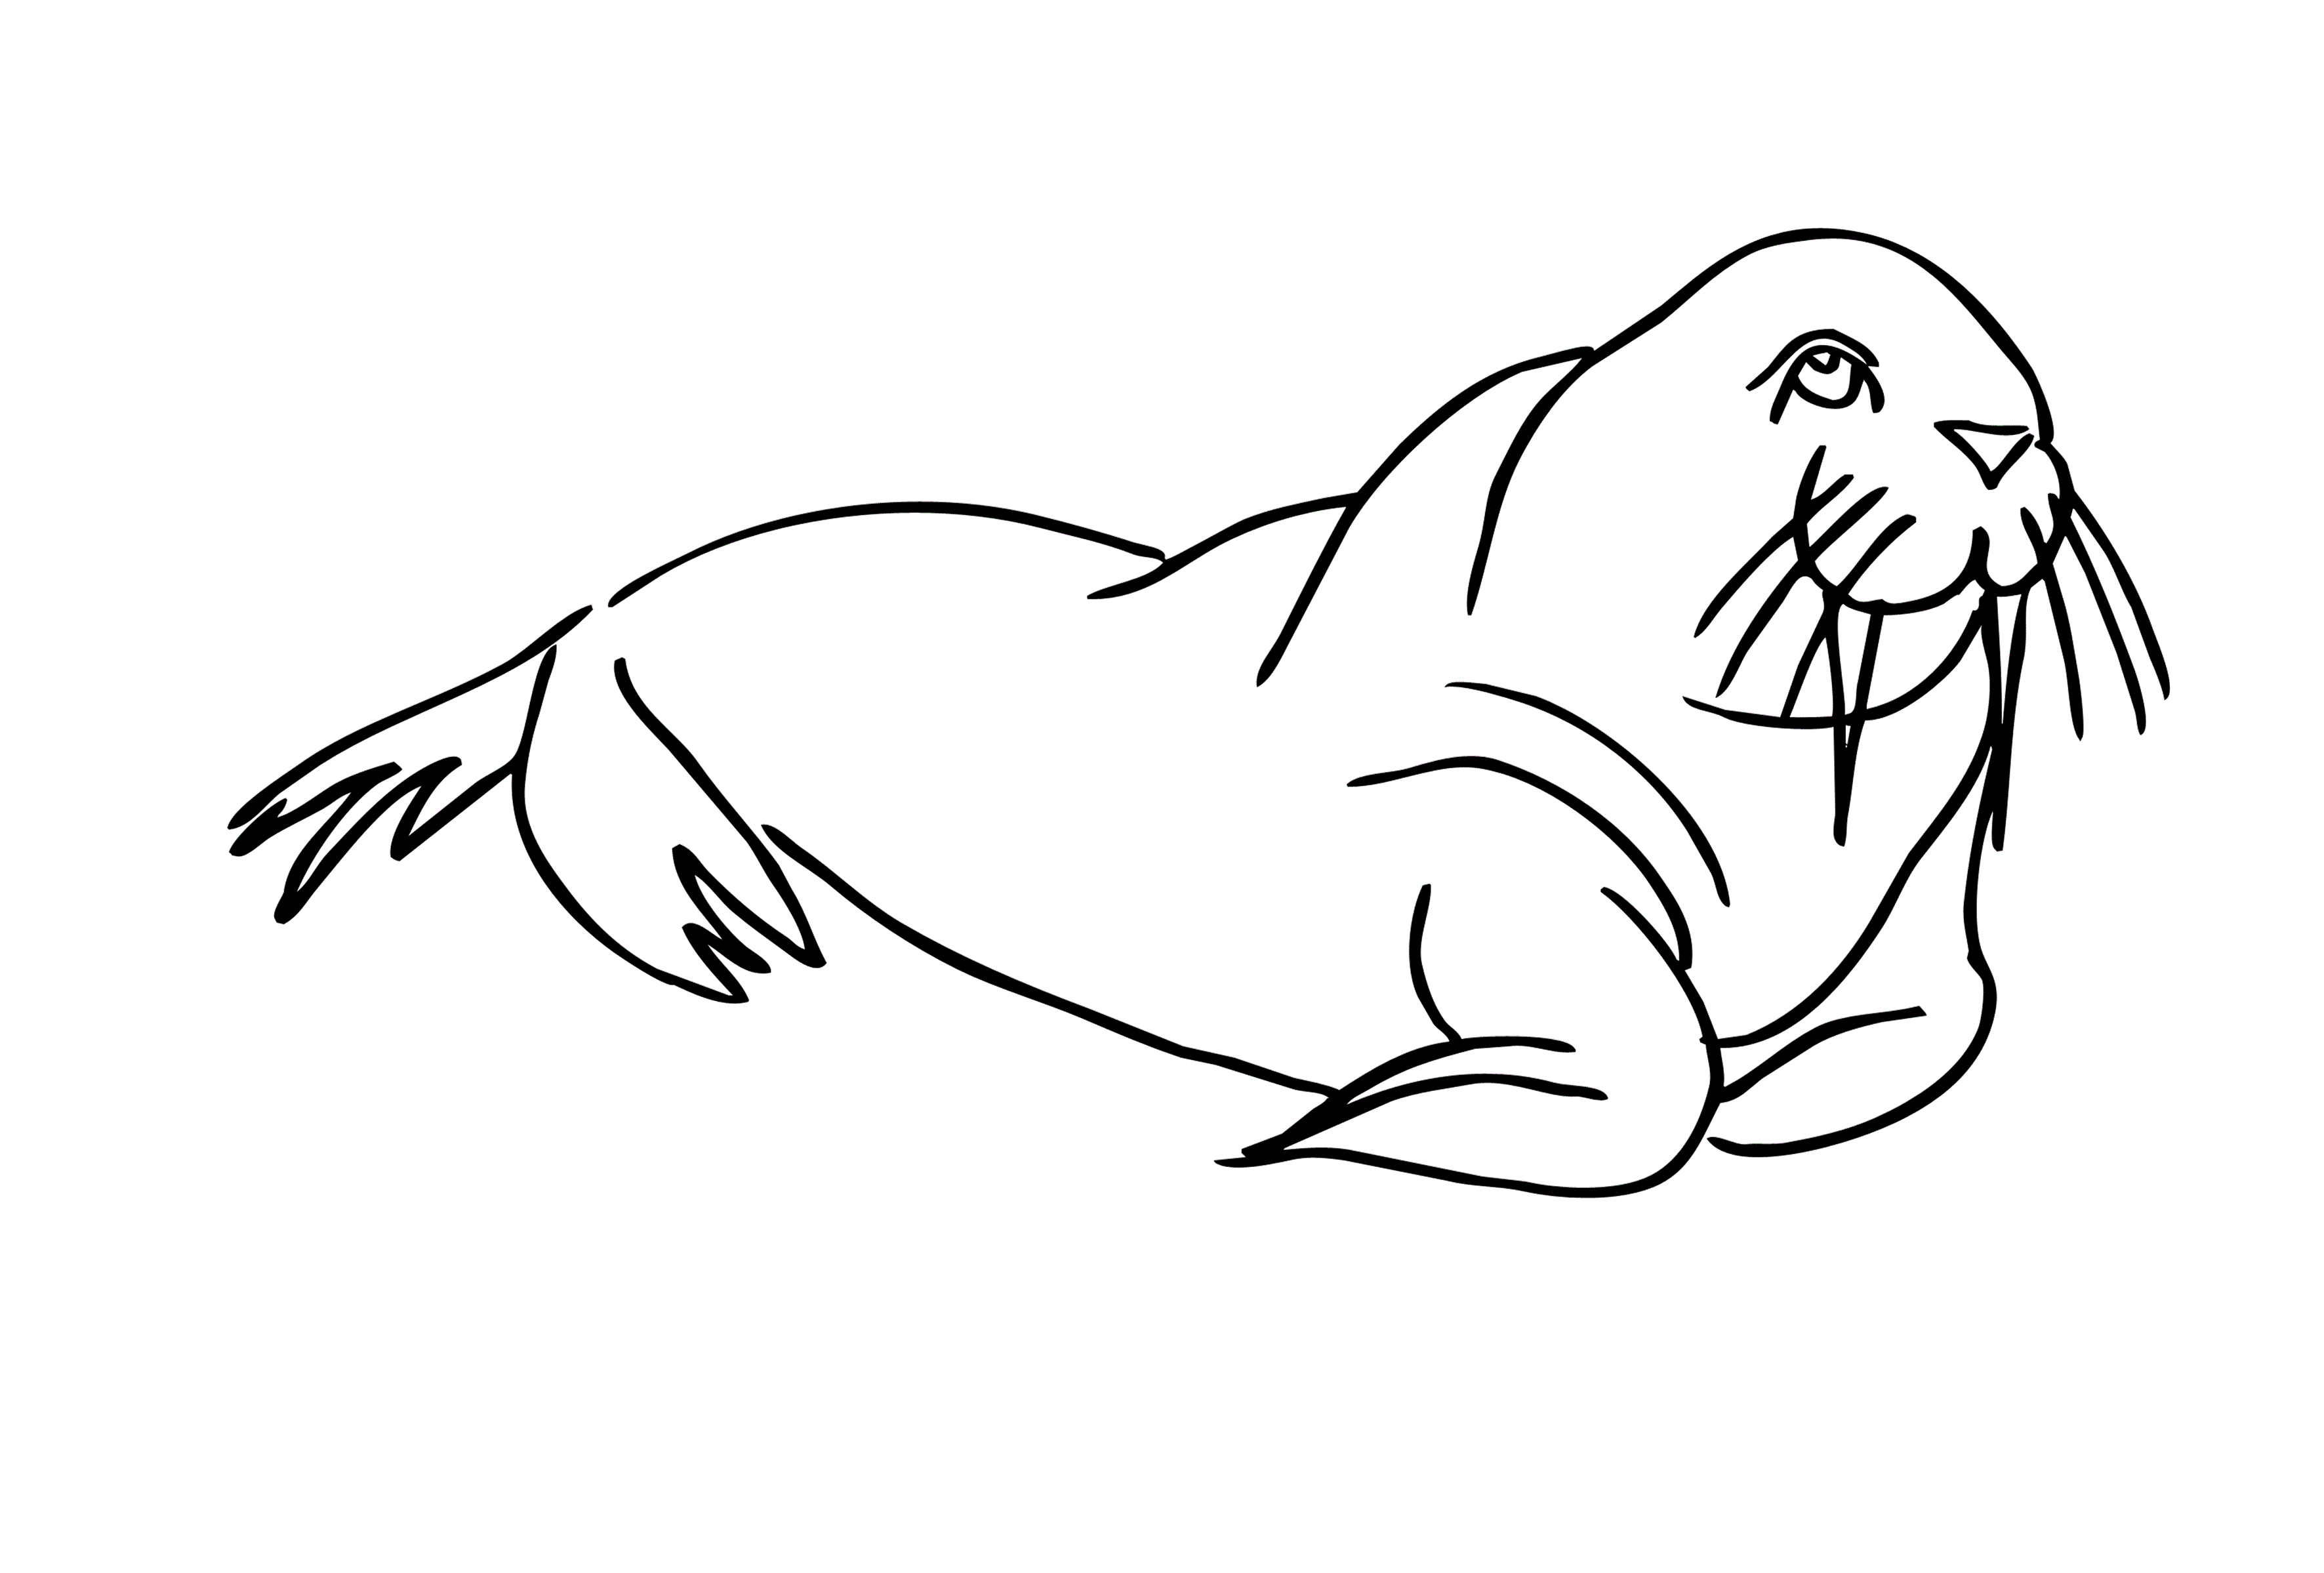 Walrus Coloring Pages to download and print for free